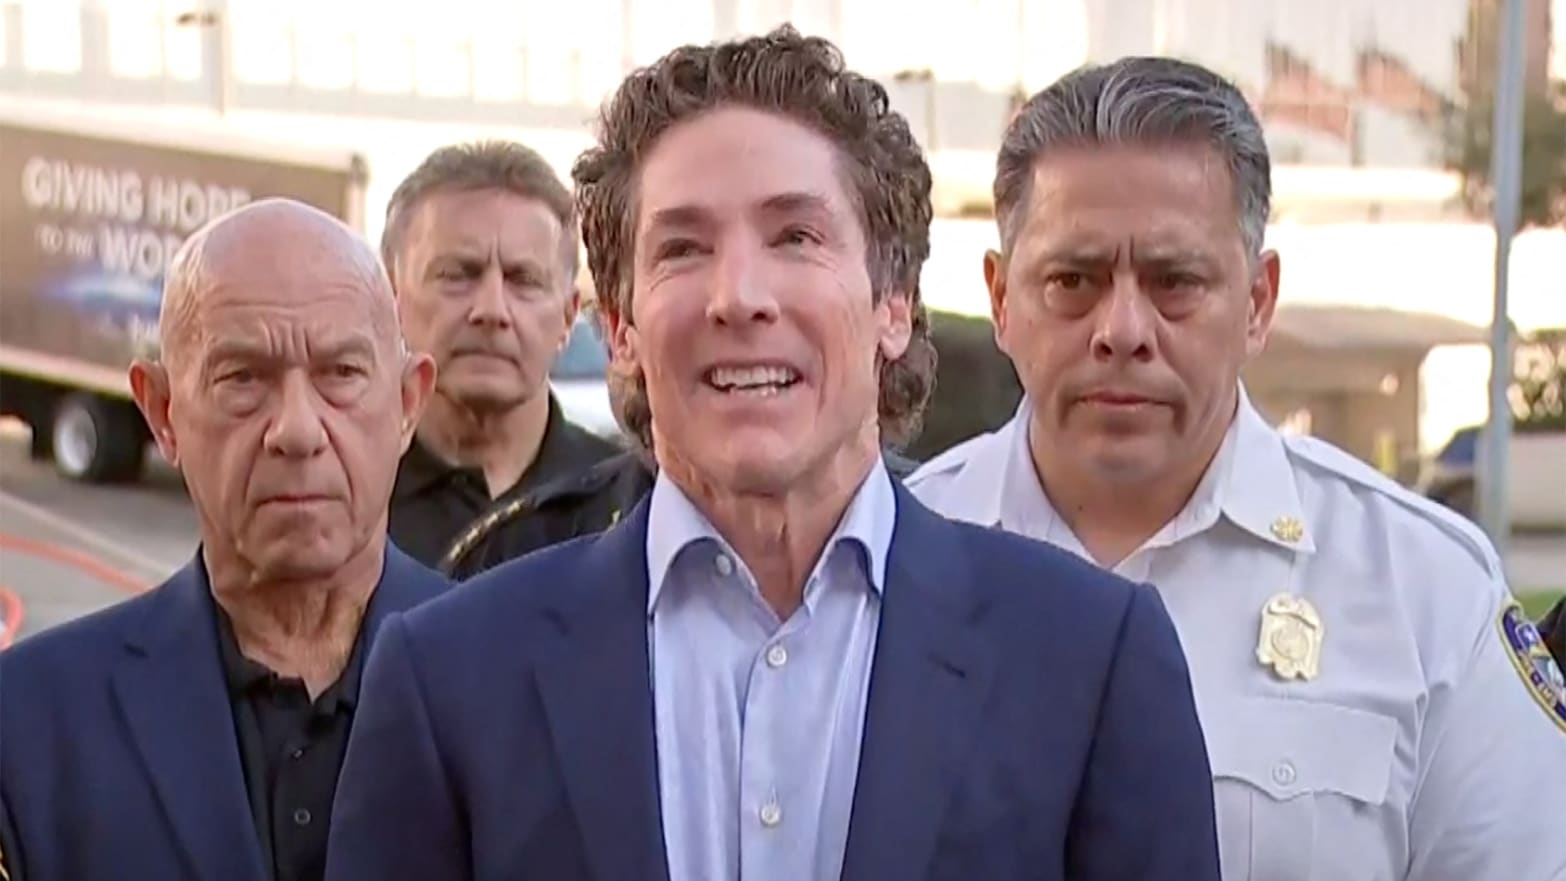 Joel Osteen holds a press conference after a shooting at his Texas megachurch